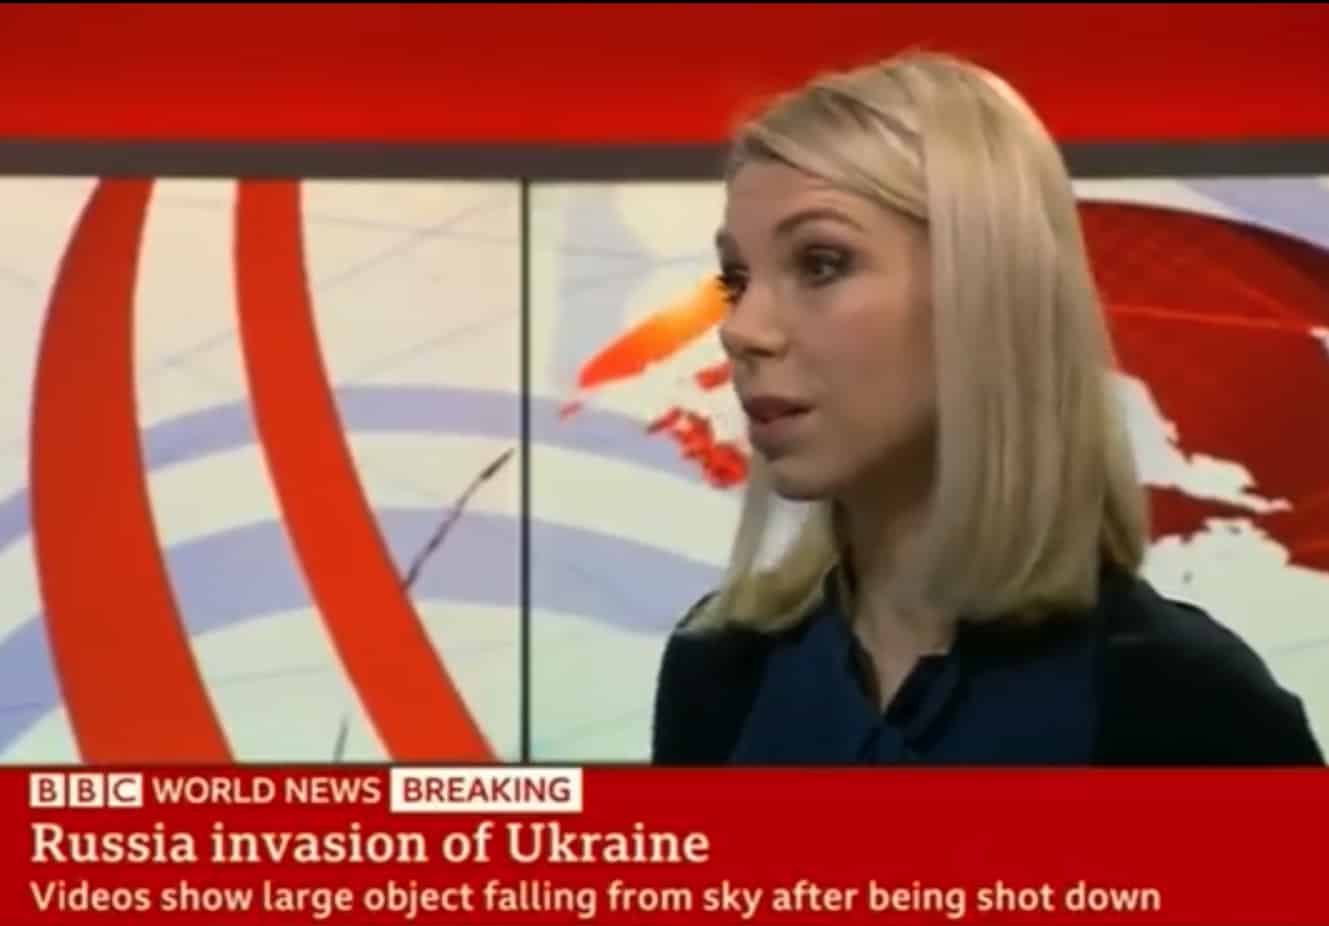 Ukrainian journalist watches her home destroyed while reporting live